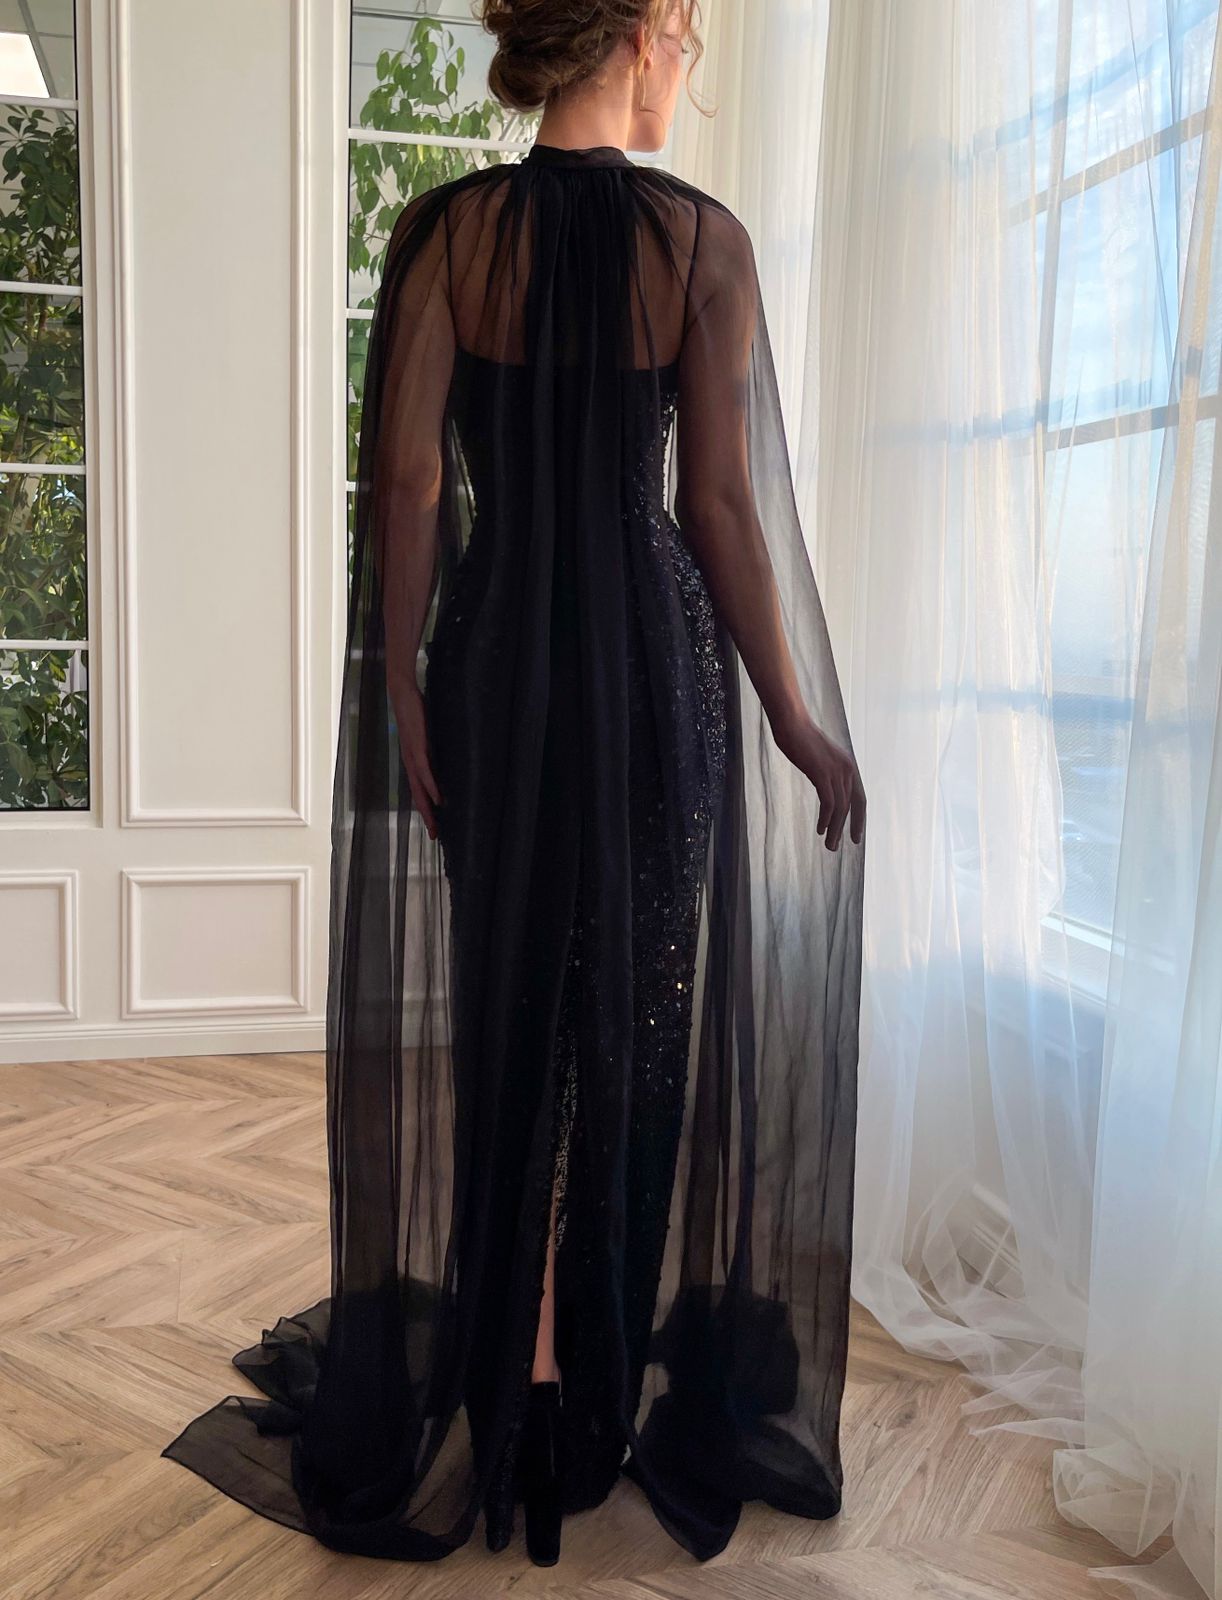 Black mermaid dress with sequins, spaghetti straps and cape